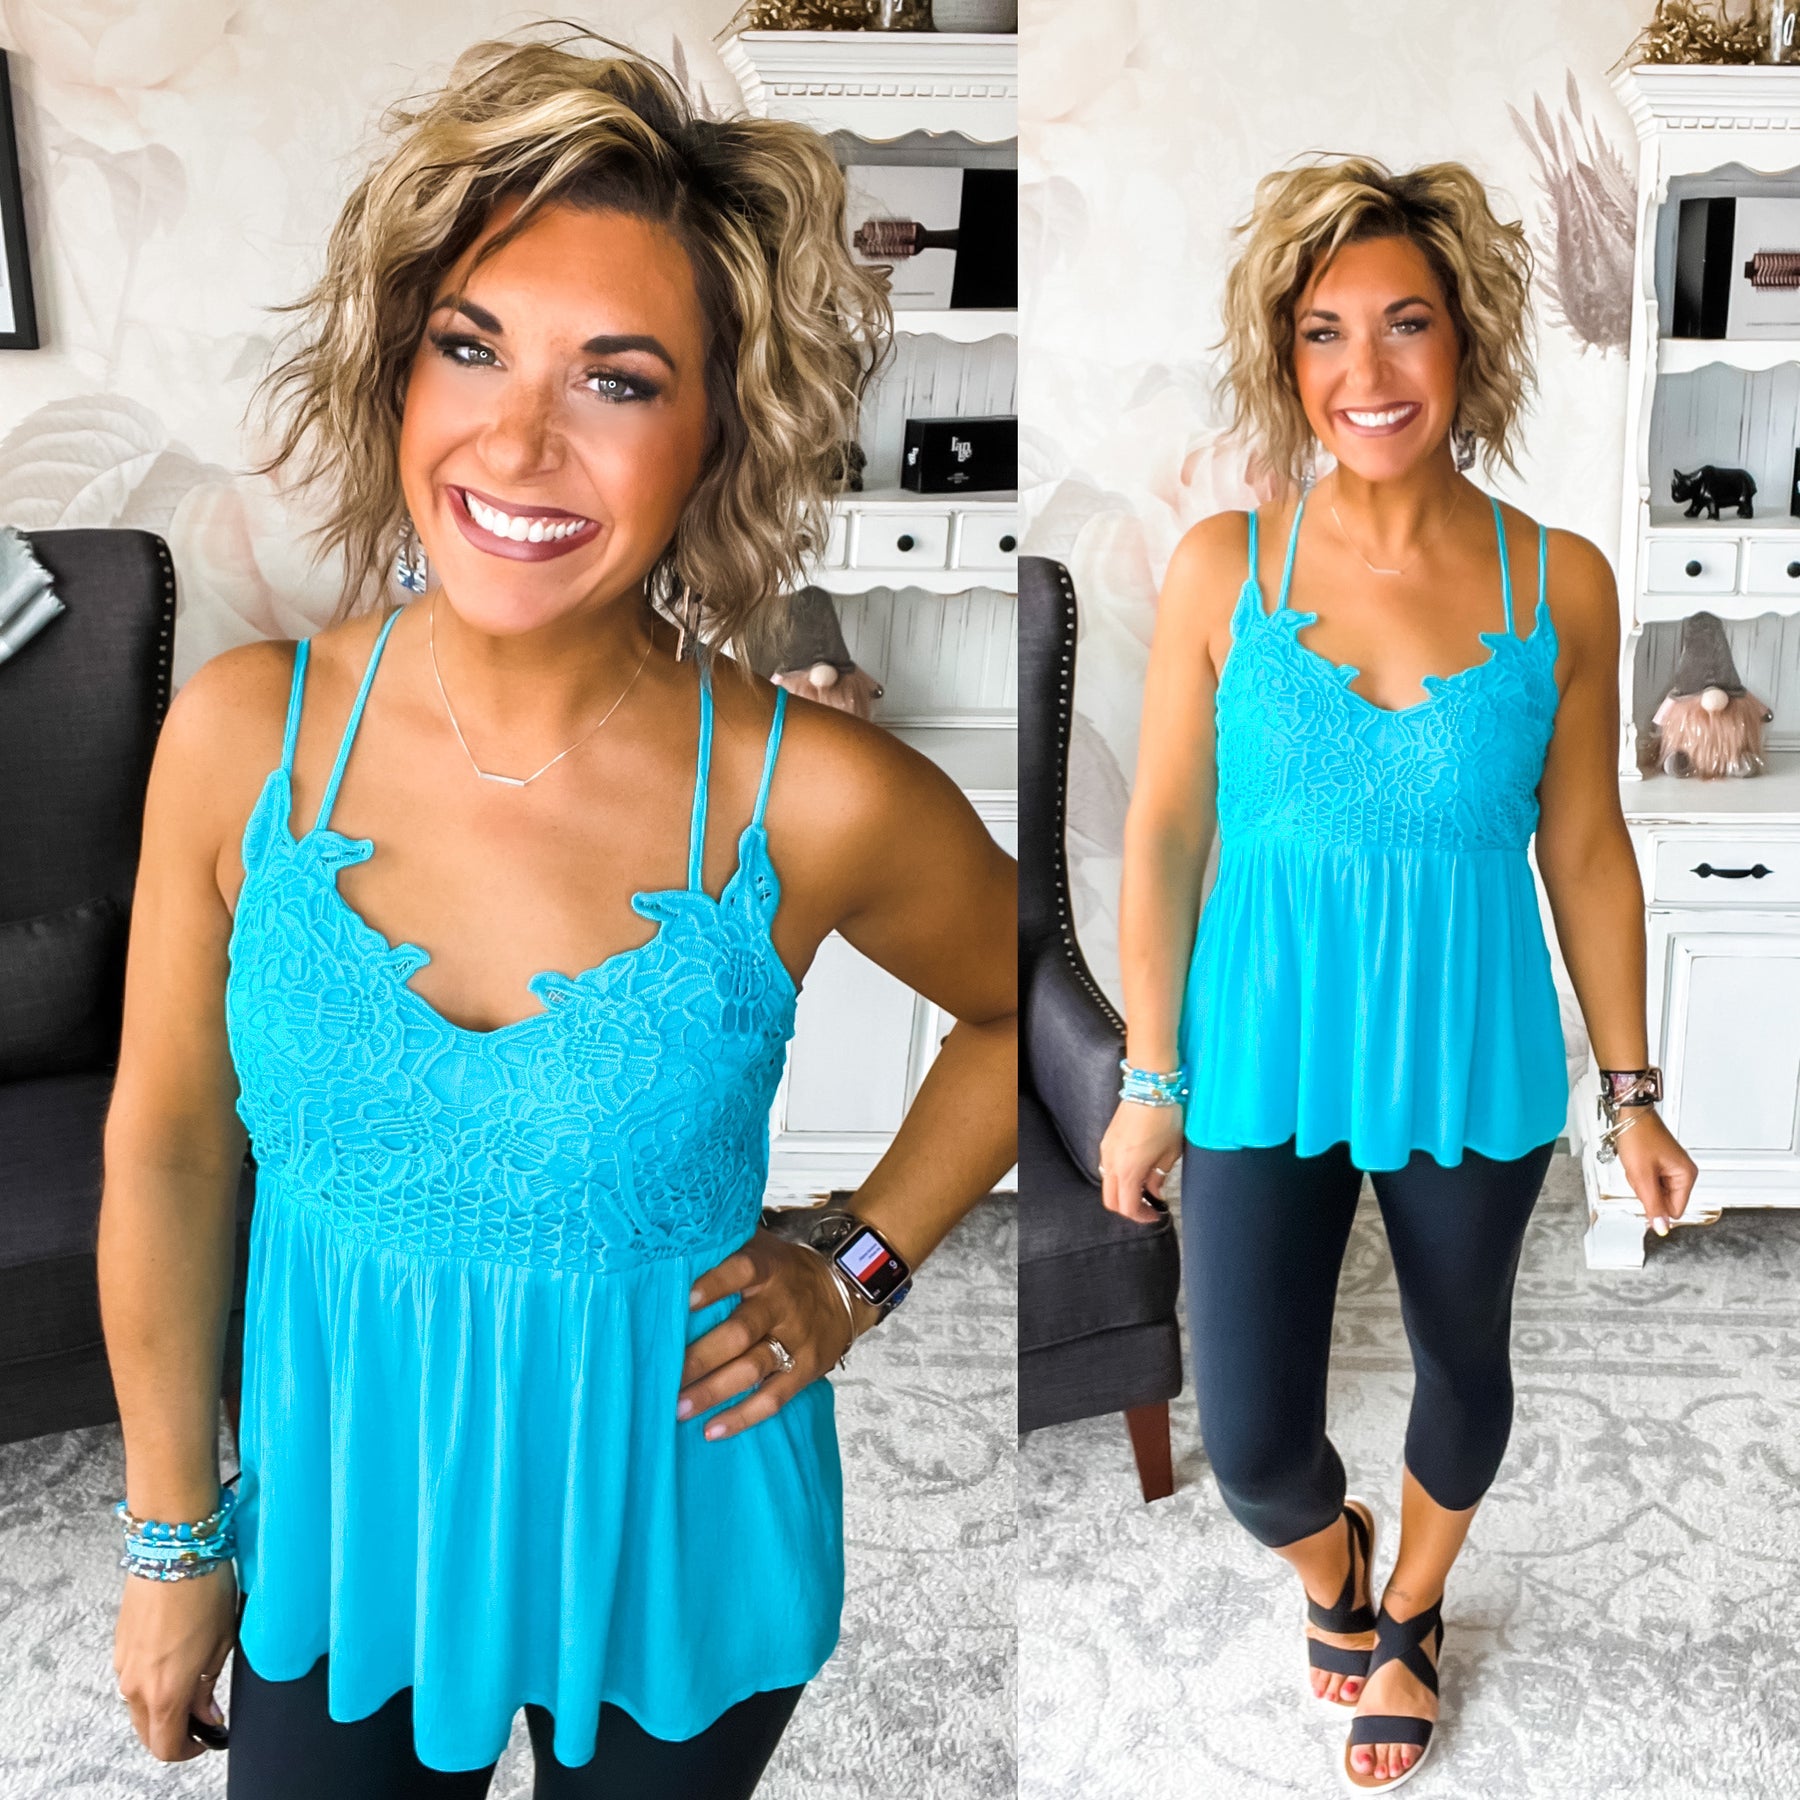 Give Them Grace Lace Tank - Turquoise